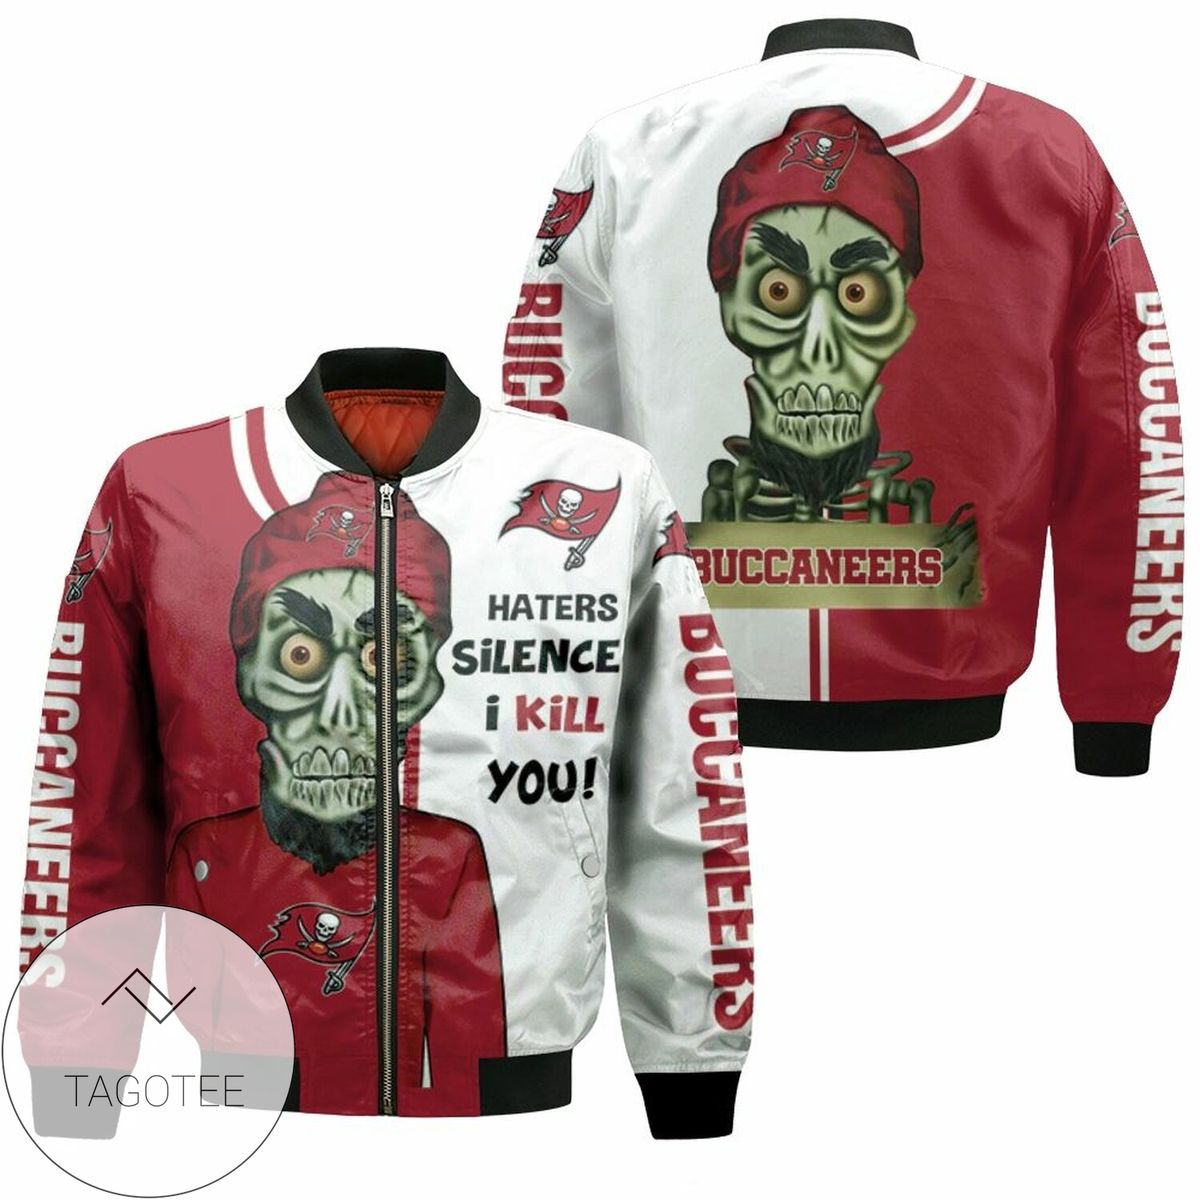 Tampa Bay Buccaneers Haters I Kill You 3D Bomber Jacket